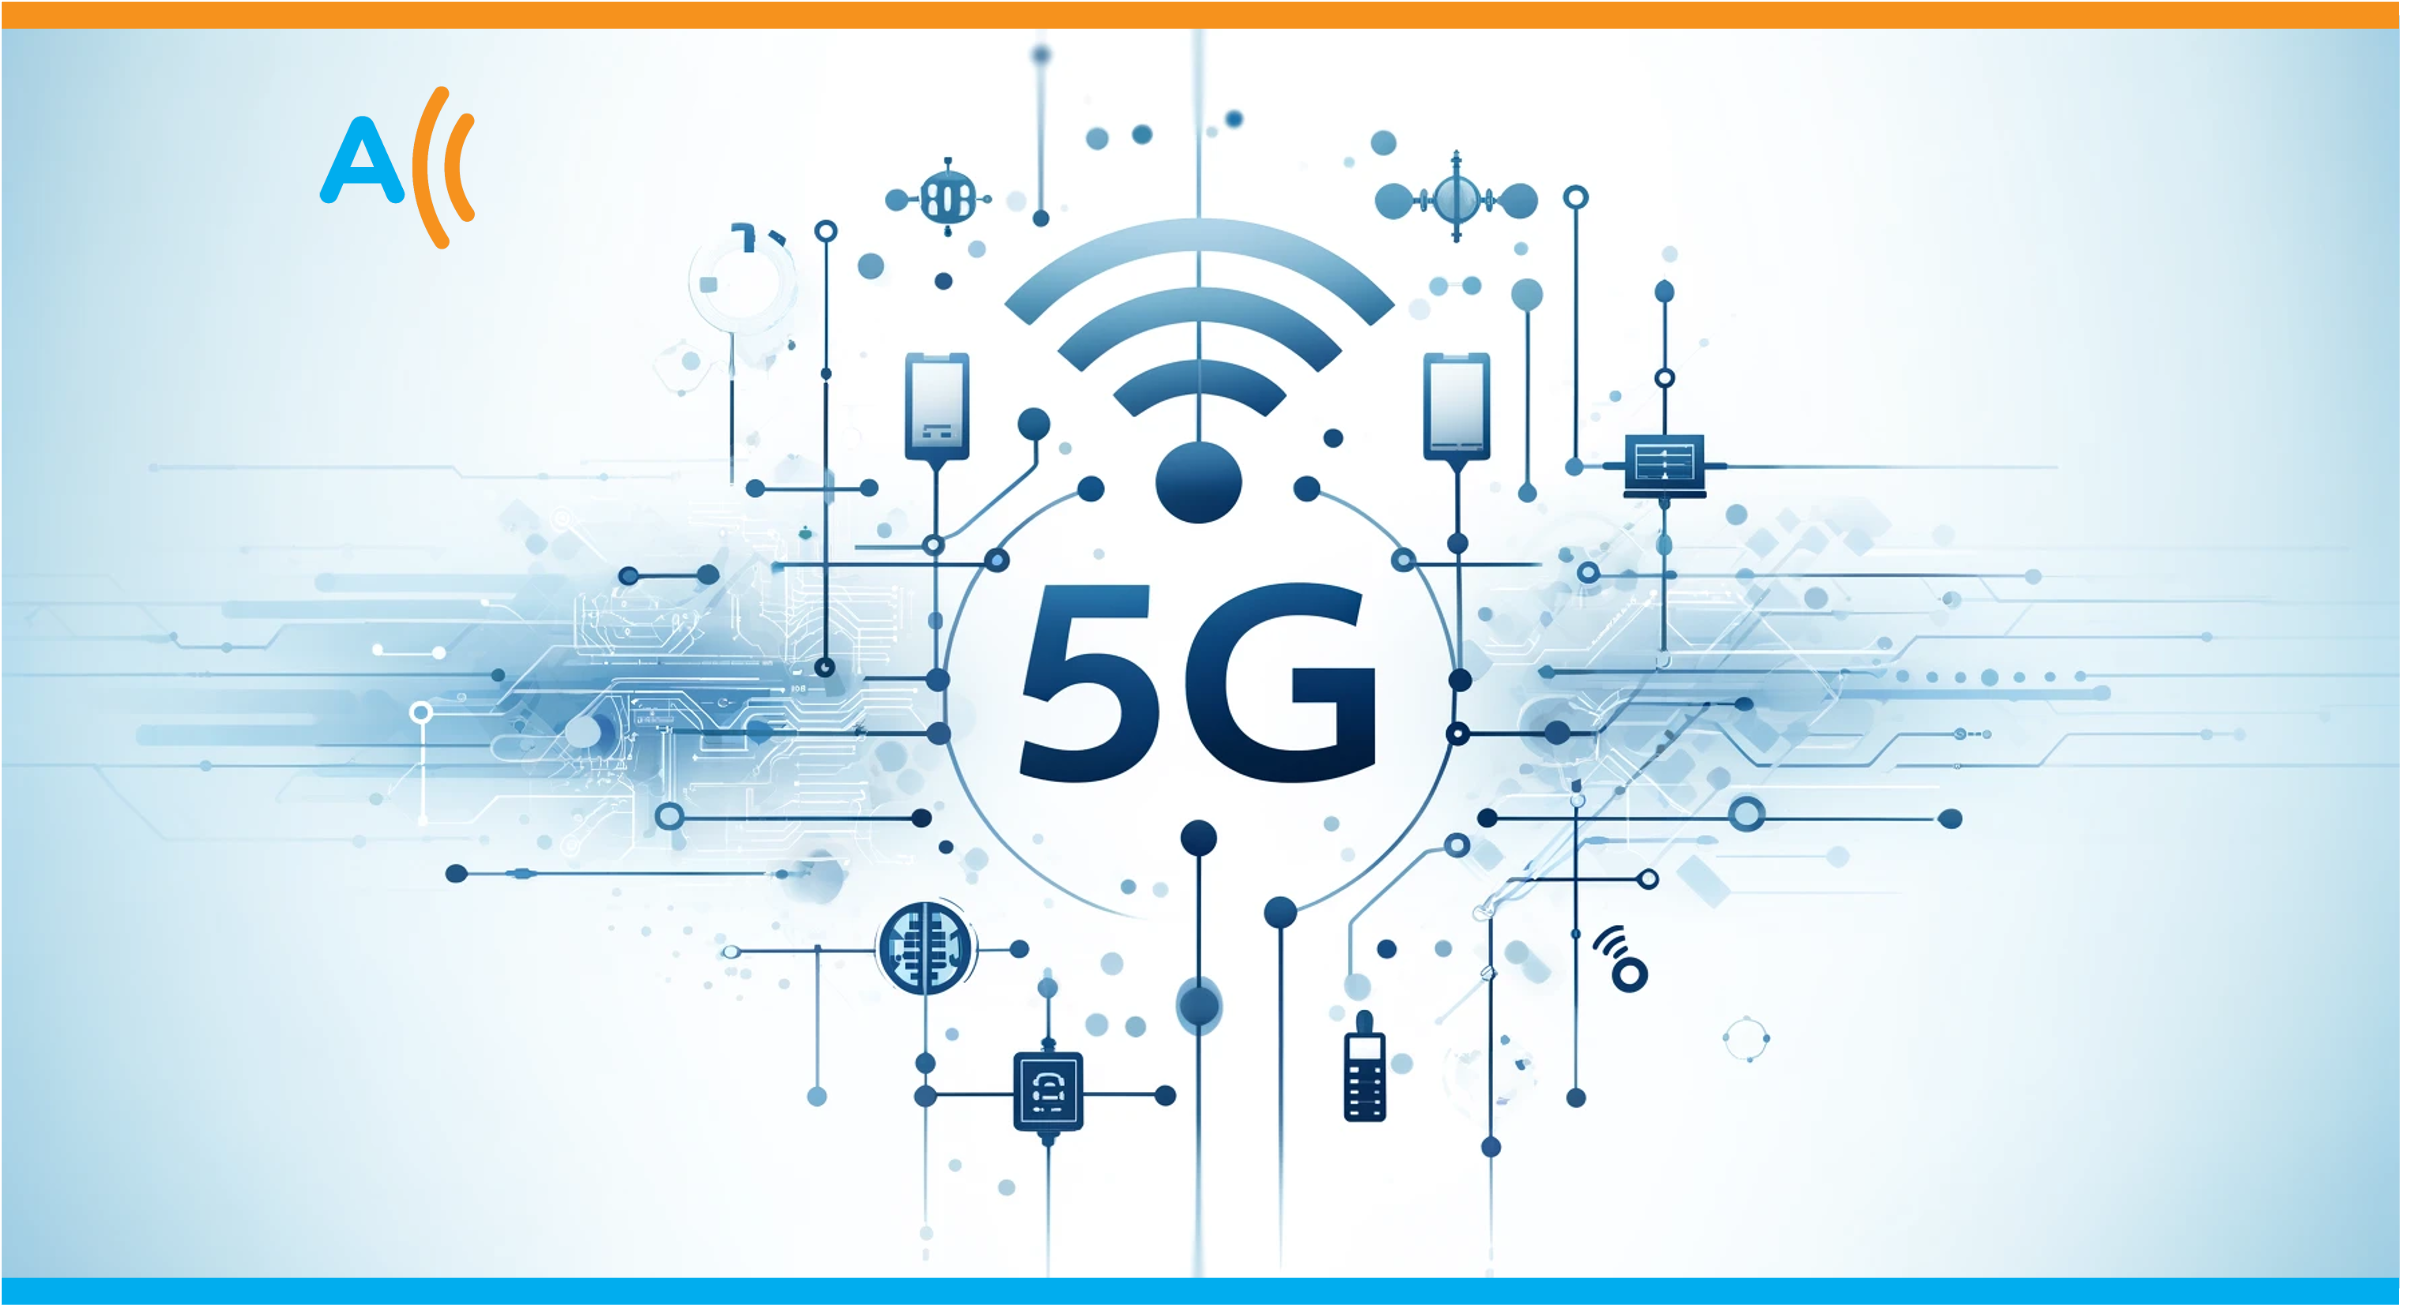 How to build a Private 5G Network